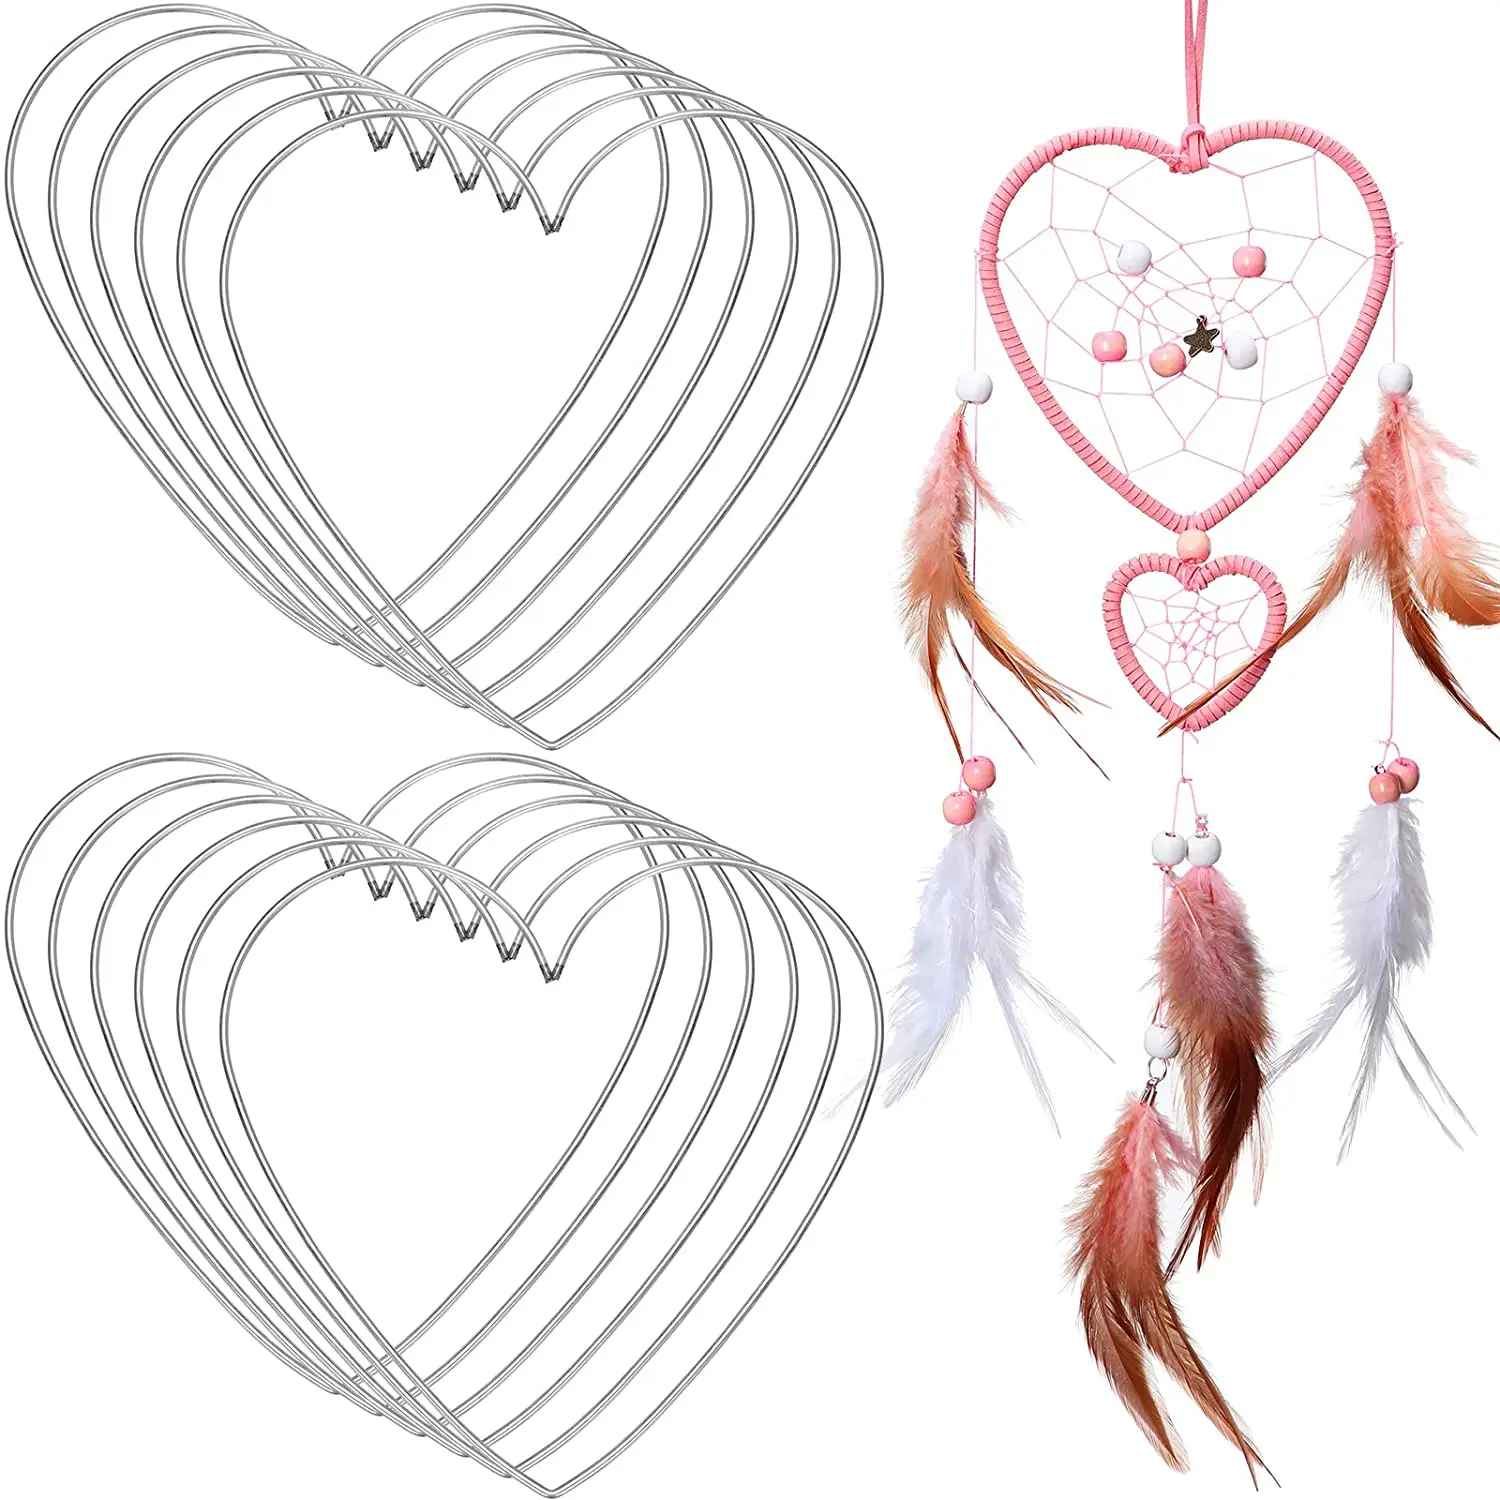 

Tailai Metal Hoops 10 PCS Heart Shaped Dream Catcher Craft Rings Silver Macrame Hoops for DIY Crafts Wedding Wall Hanging Decor